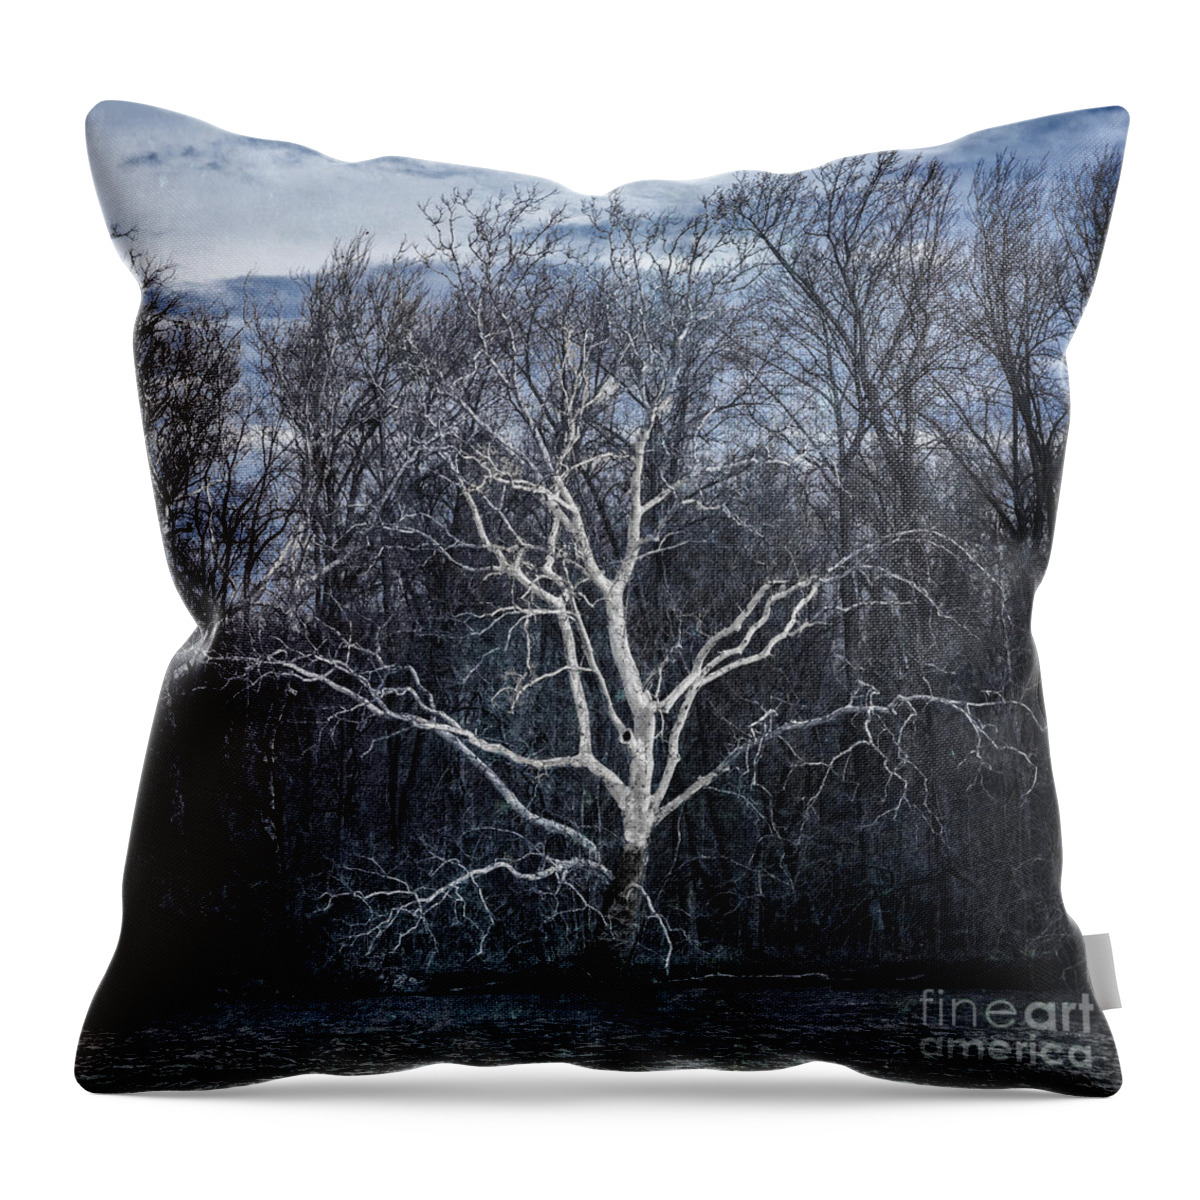 Sycamore Throw Pillow featuring the photograph Sycamore Dreamer by Terry Rowe